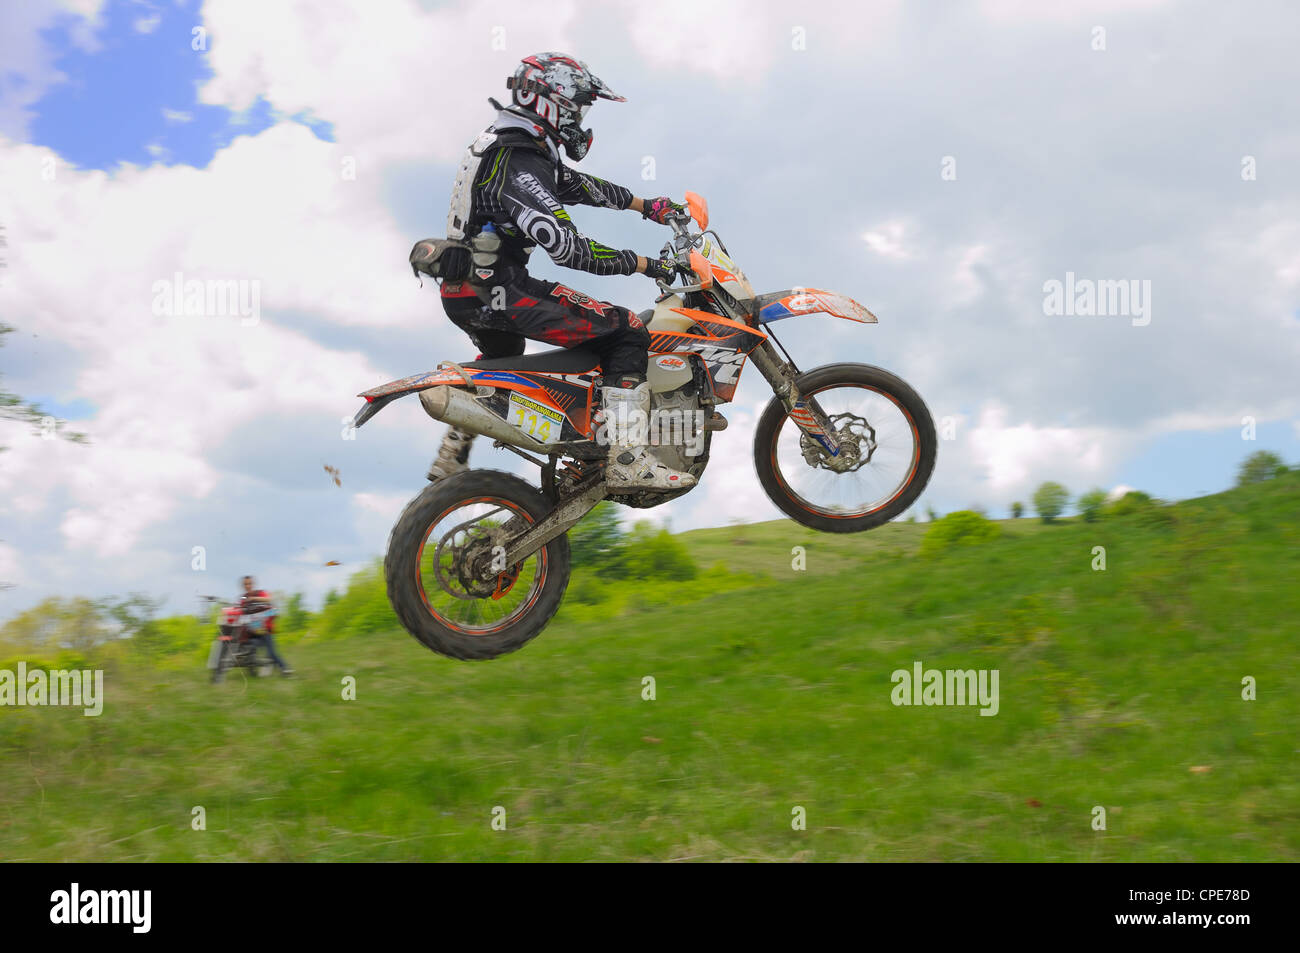 GHELARI, ROMANIA - MAY 5 2012: Norbert Levente JOZSA in action, jumping with his KTM bike, at  'Enduro Panorama 2012' Stock Photo